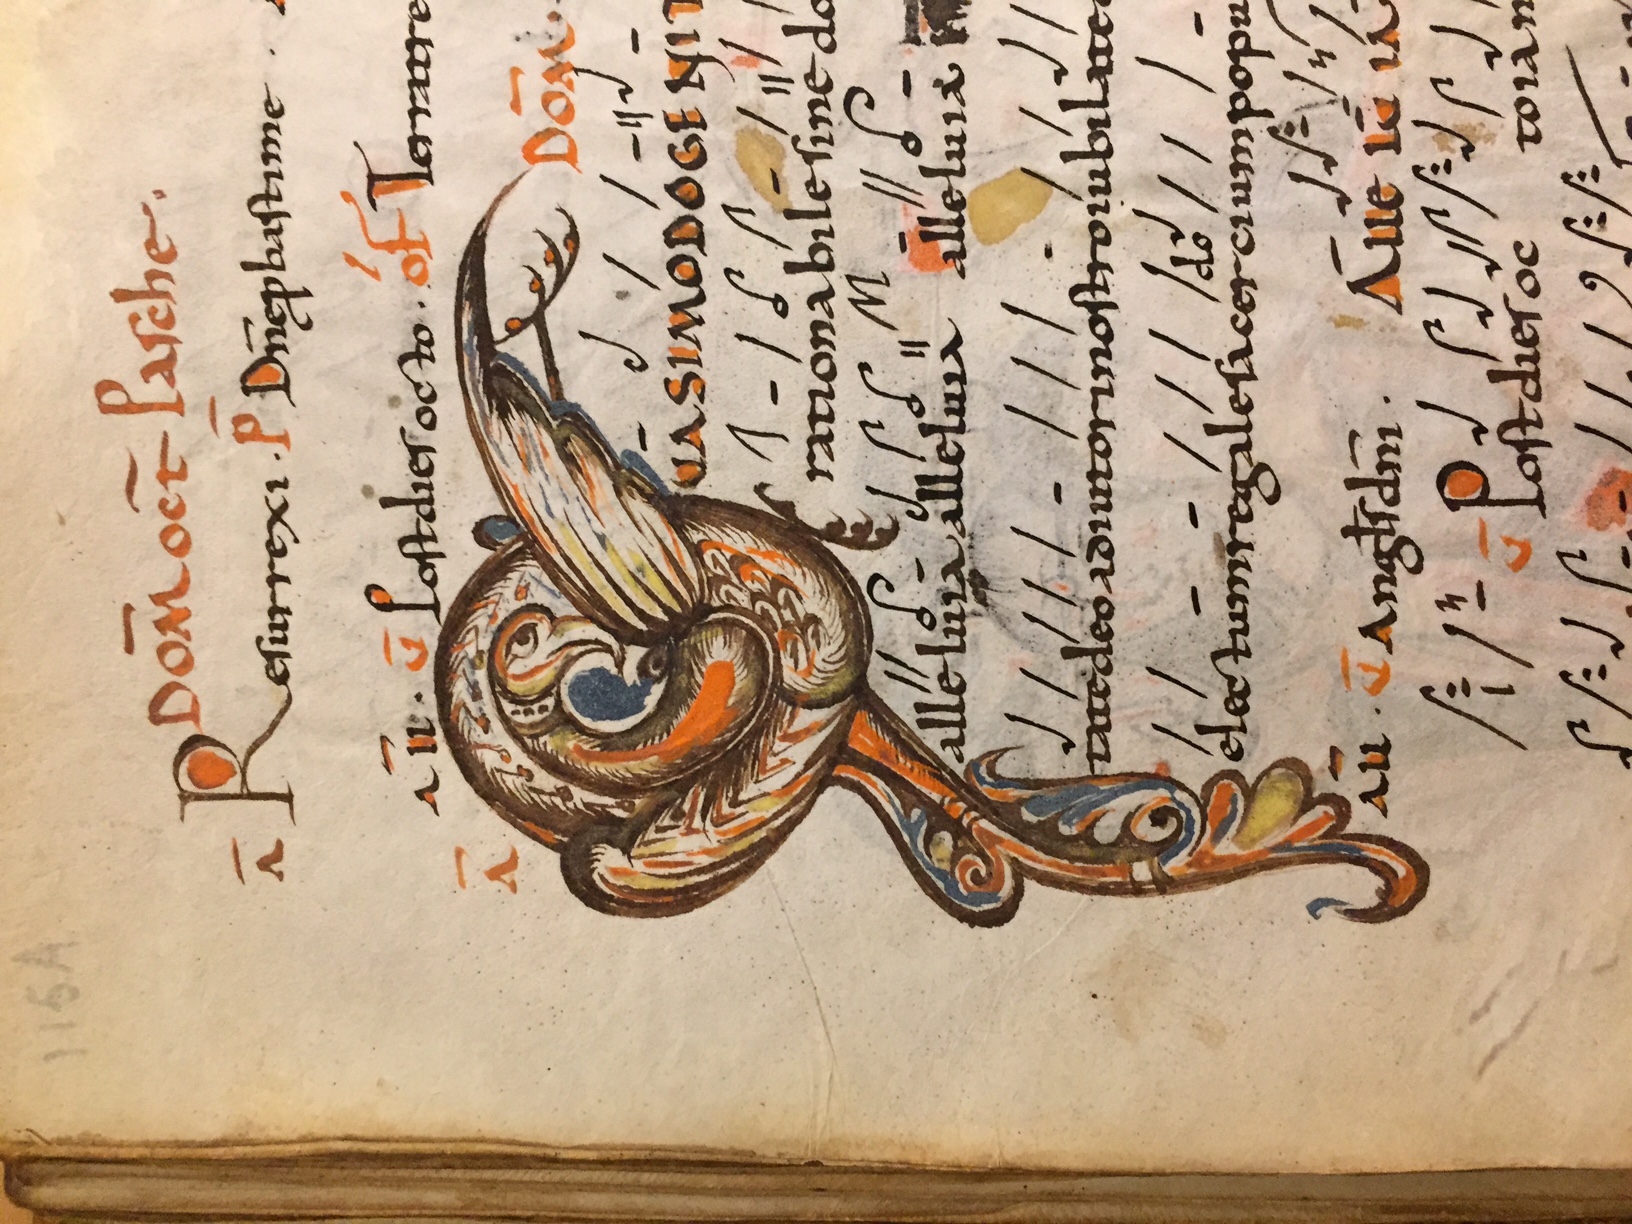 Calligraphic writing and stylized drawing of a birdlike creature from an old book.